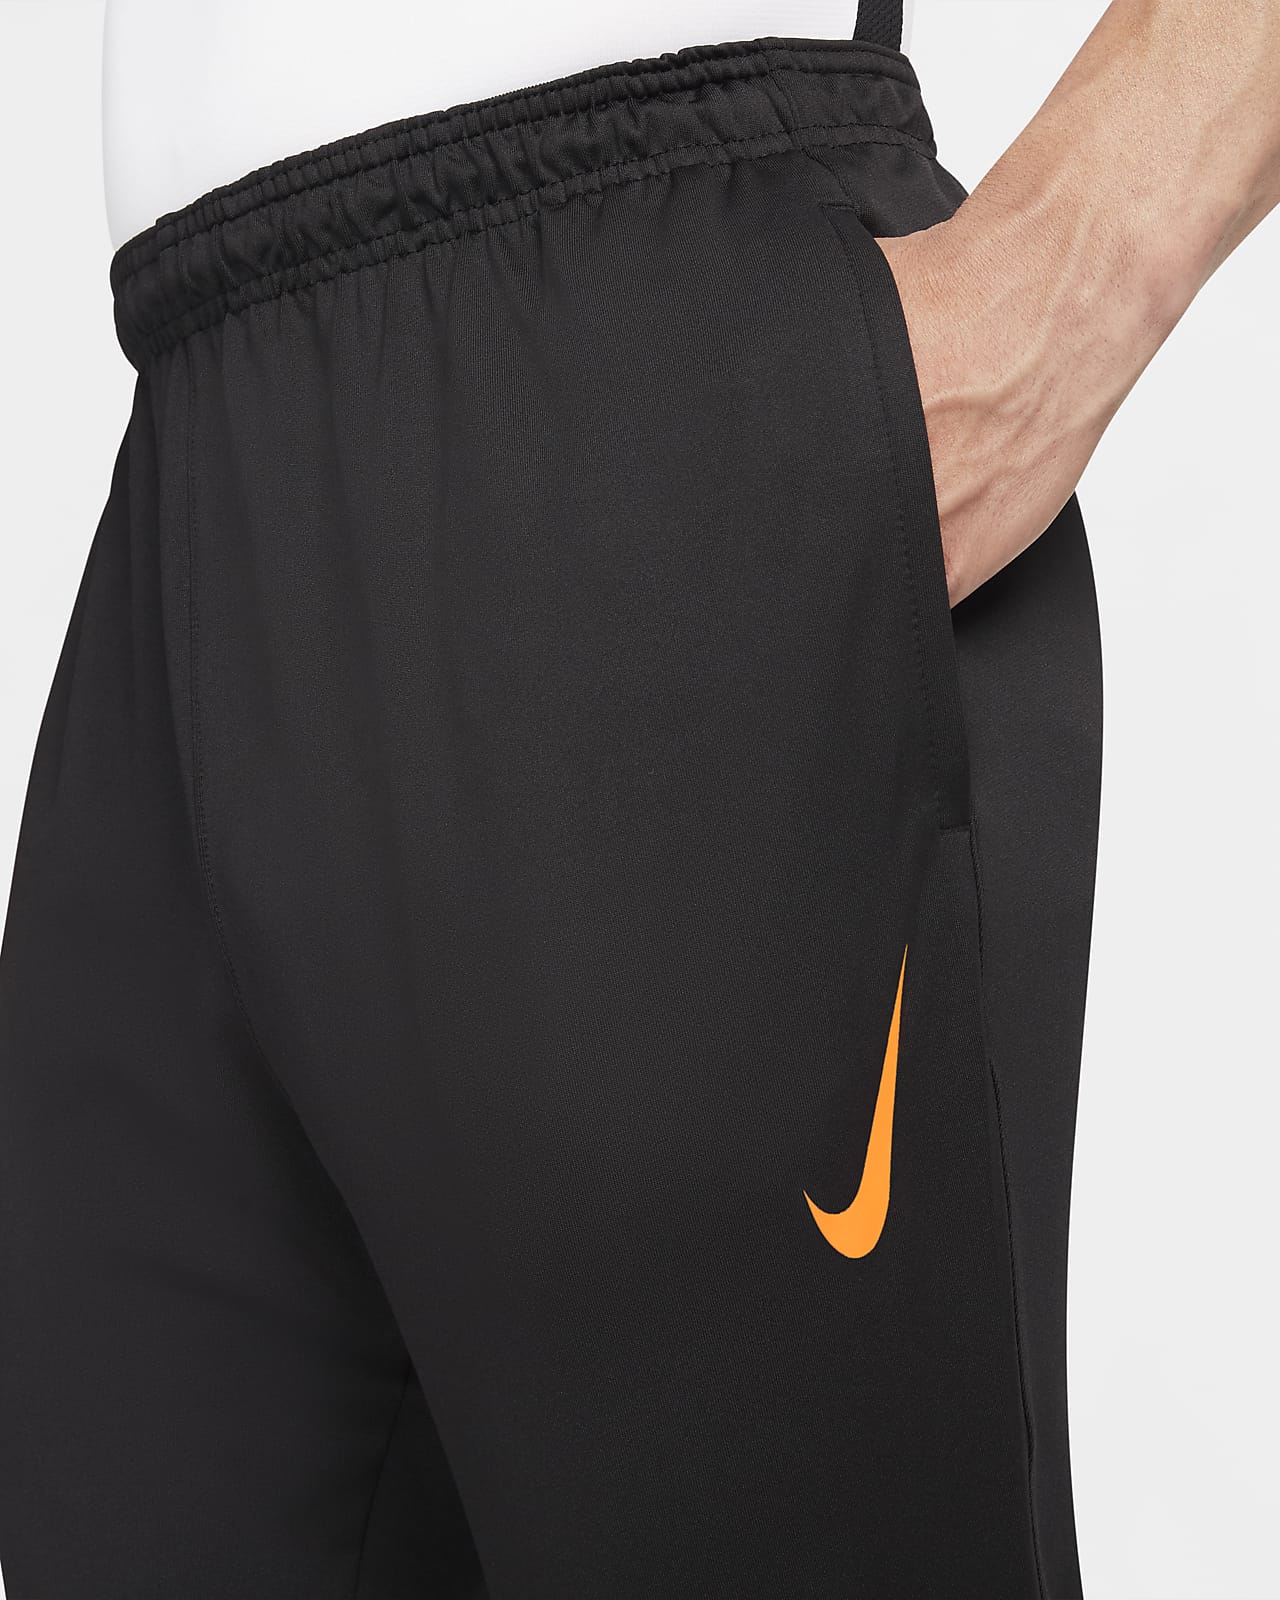 Nike Therma Fit Academy Winter Warrior Knit Soccer Pants